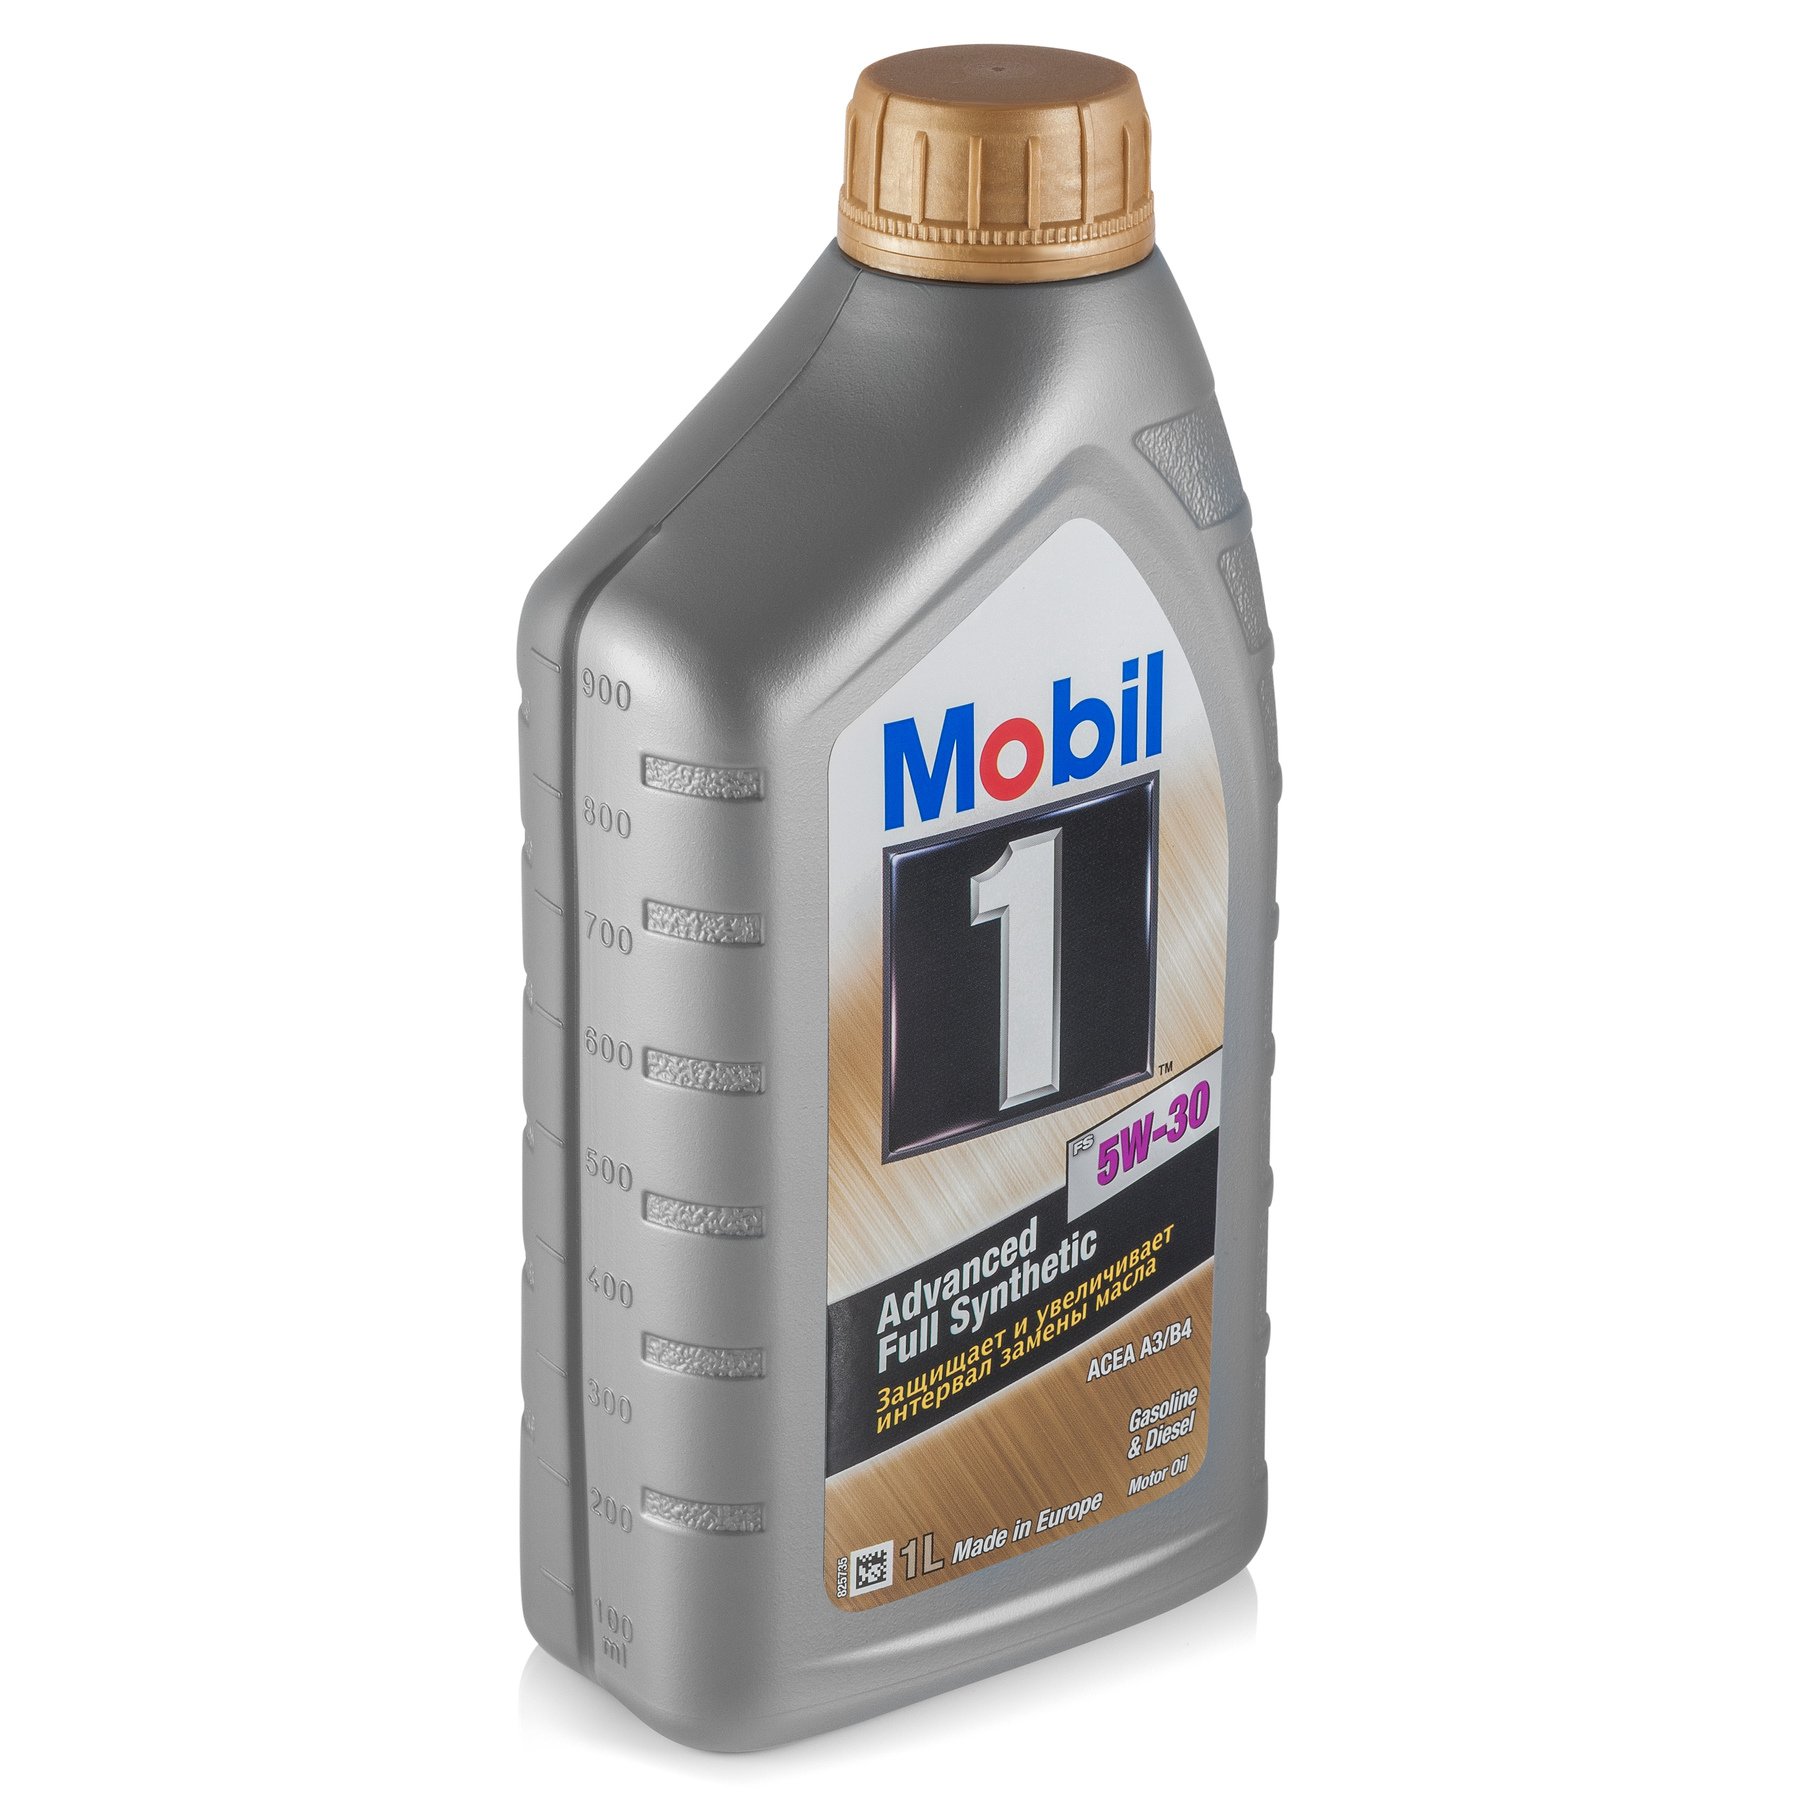 Engine oil Mobil 1 Full Synthetic 5W-30, 1L Mobil 153749